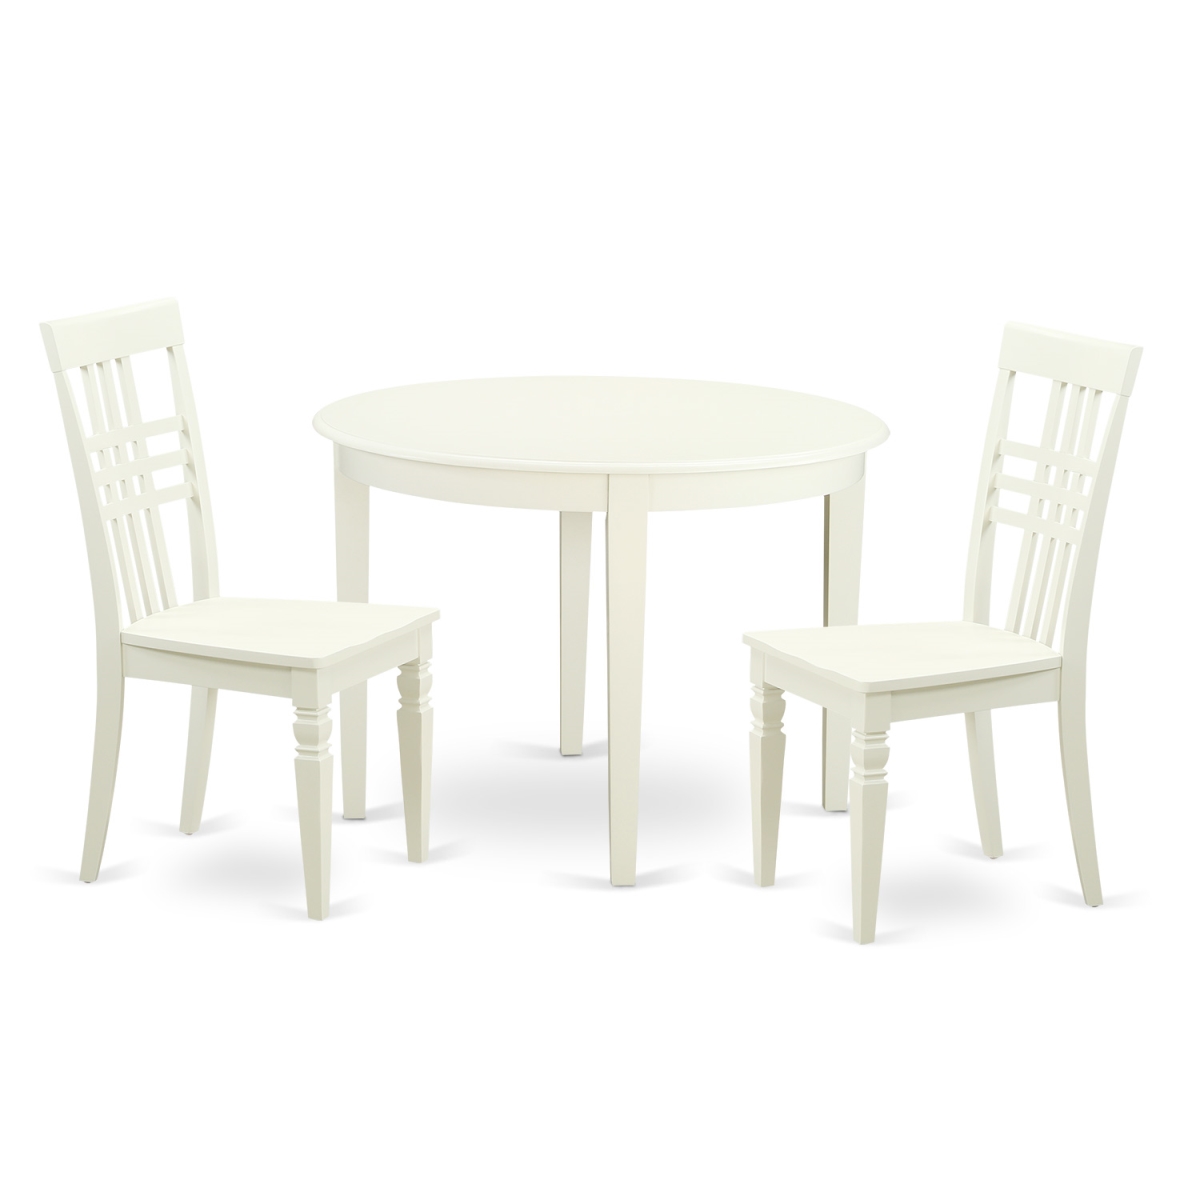 Picture of East West Furniture BOLG3-LWH-W Small Kitchen Table Set with One Boston Dining Room Table & Two Chairs, Linen White - 3 Piece